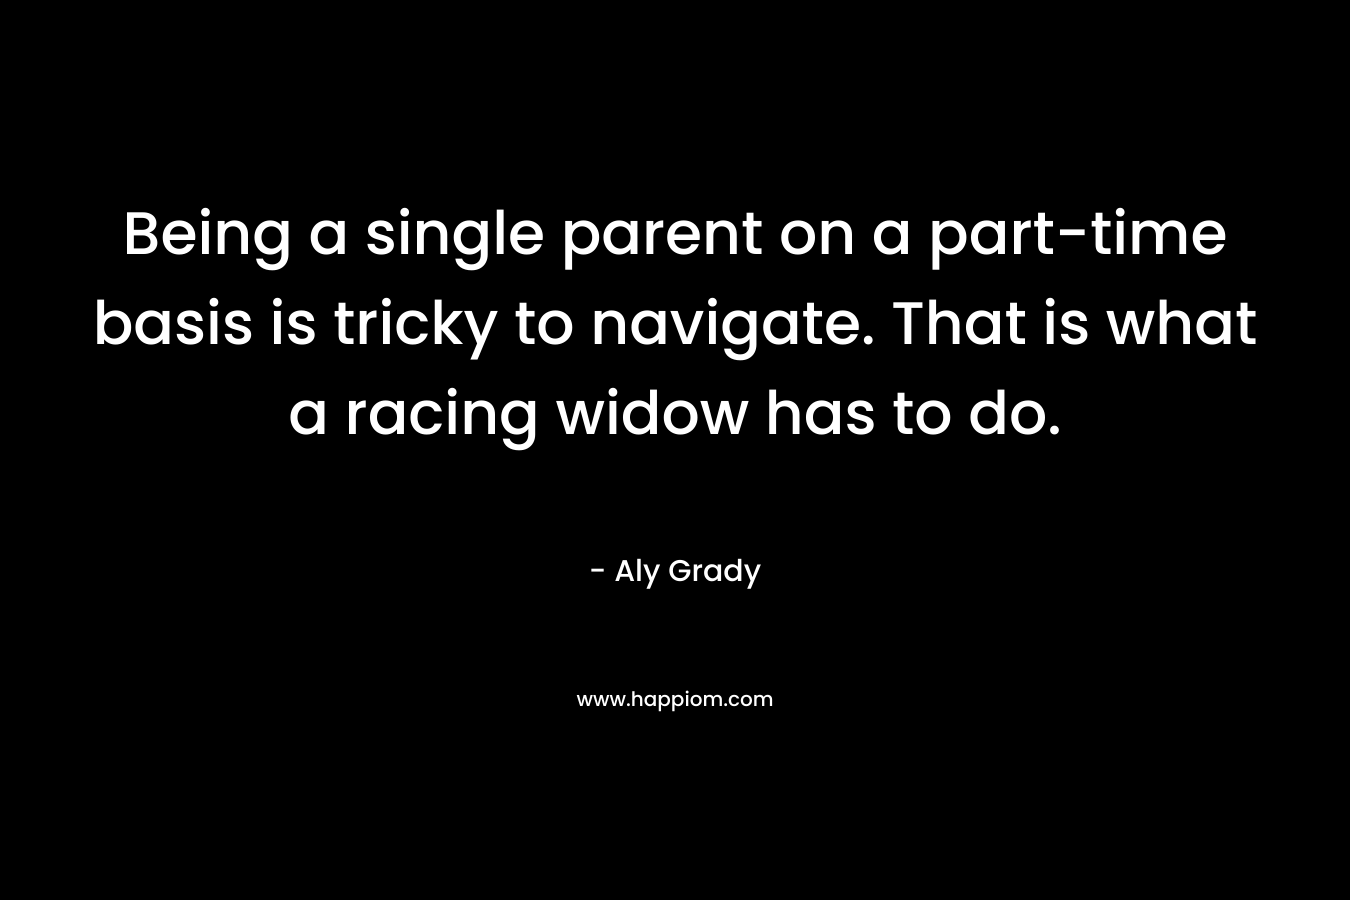 Being a single parent on a part-time basis is tricky to navigate. That is what a racing widow has to do. – Aly Grady